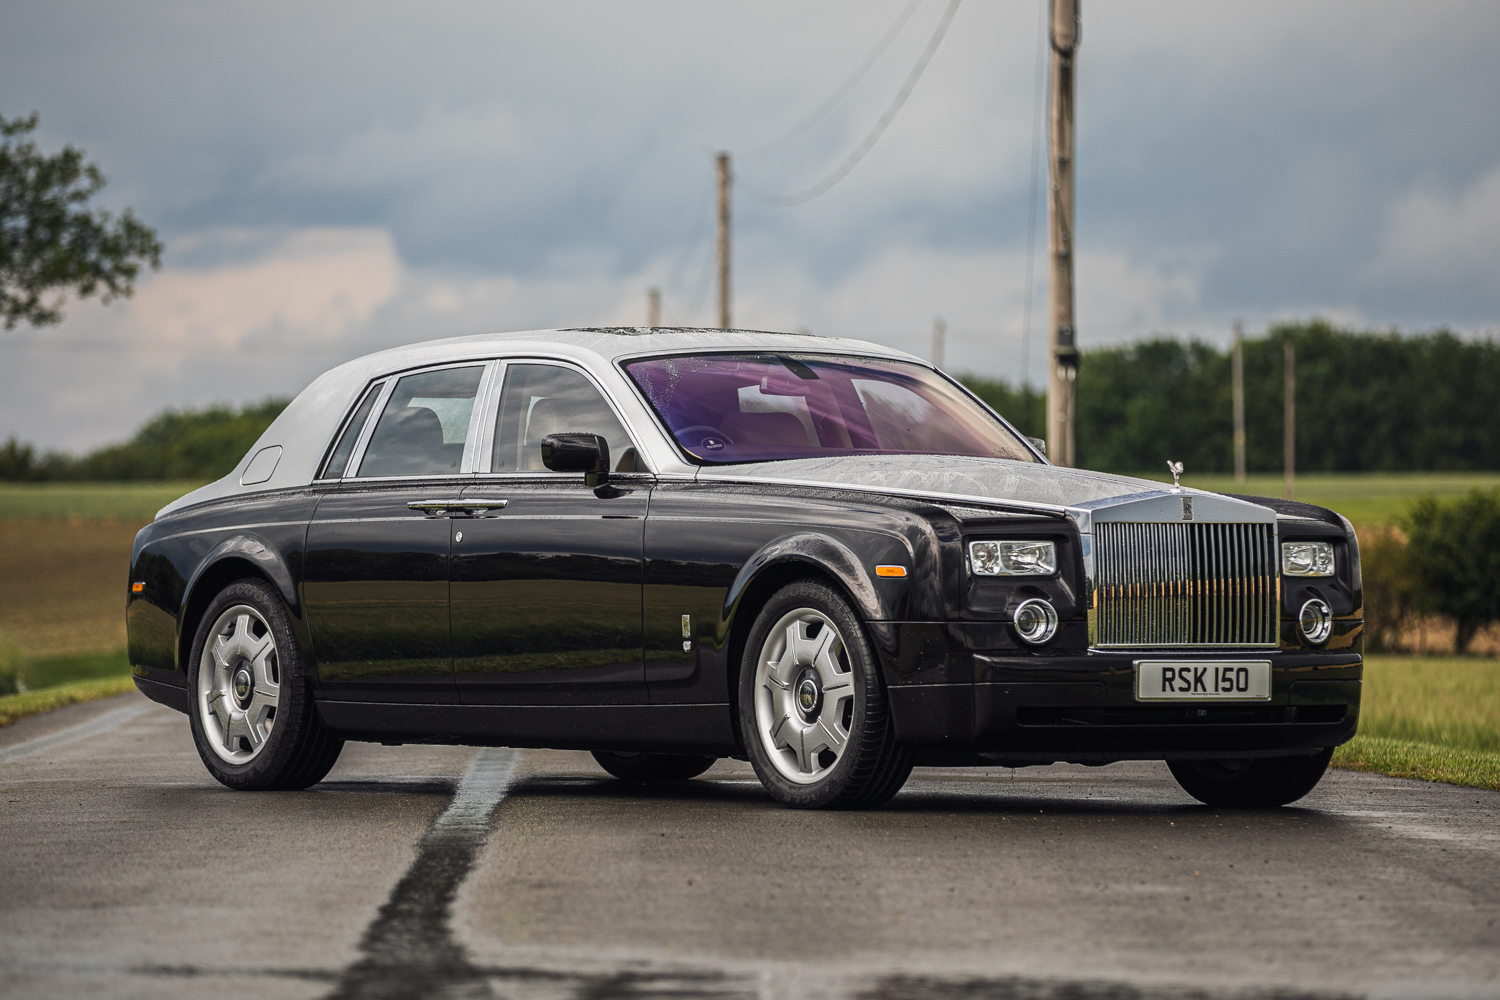 2014 ROLLSROYCE GHOST  LHD for sale by auction in London United Kingdom